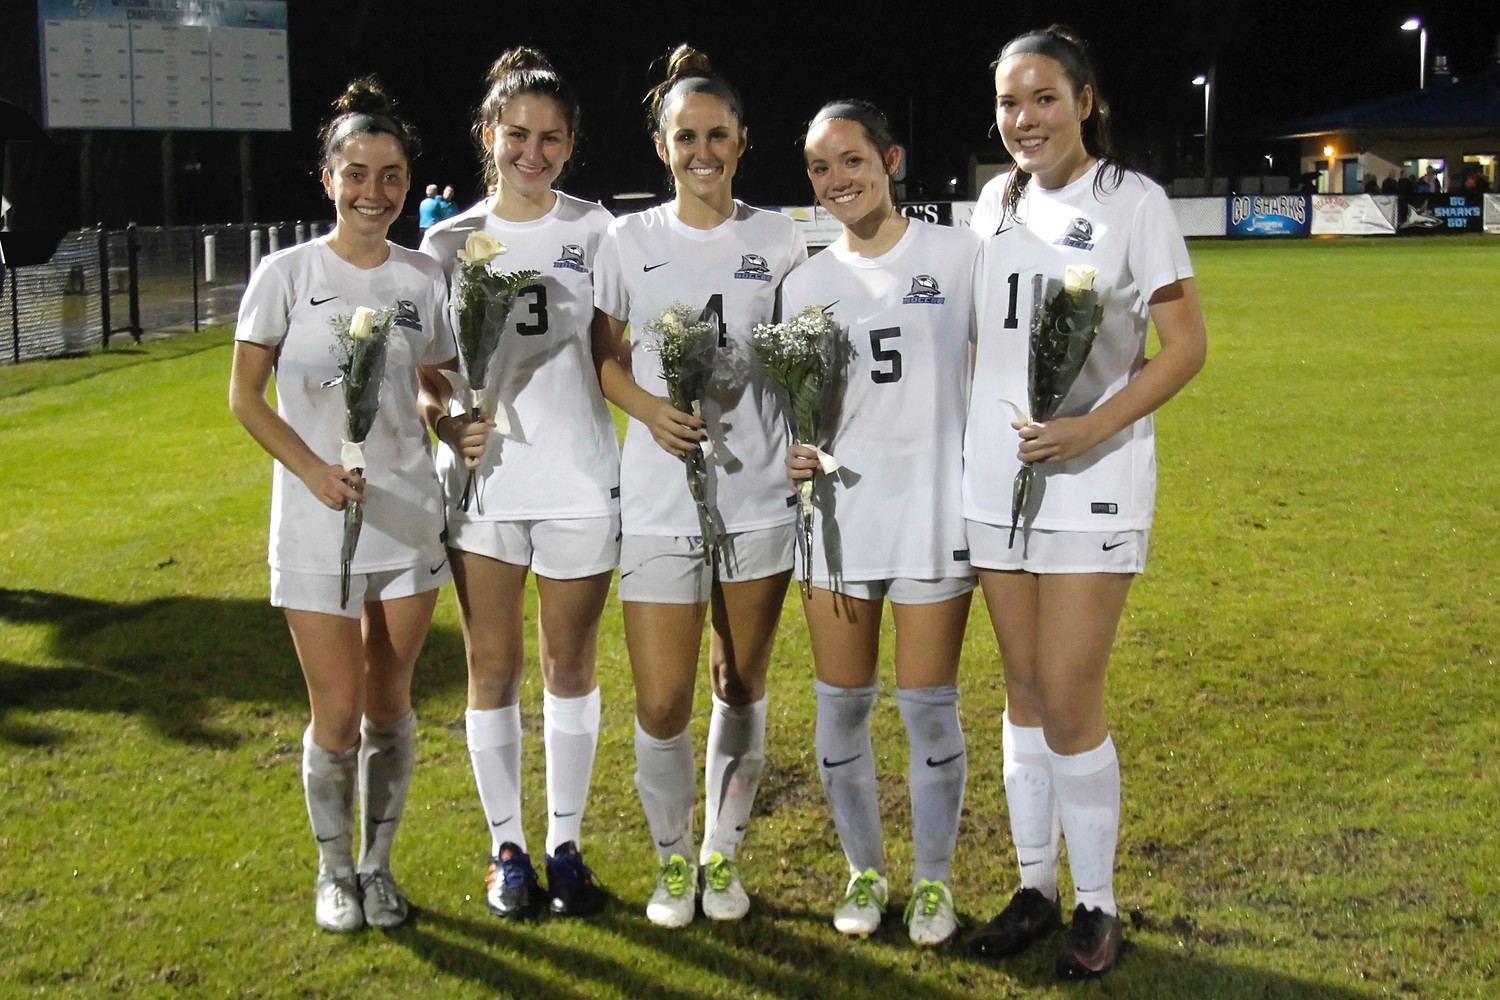 The five Shark seniors pose with roses. Left to right: Molly Miller, Leah Cills, Piper Dotsikas, Tatum Taucher and Katie Beman.